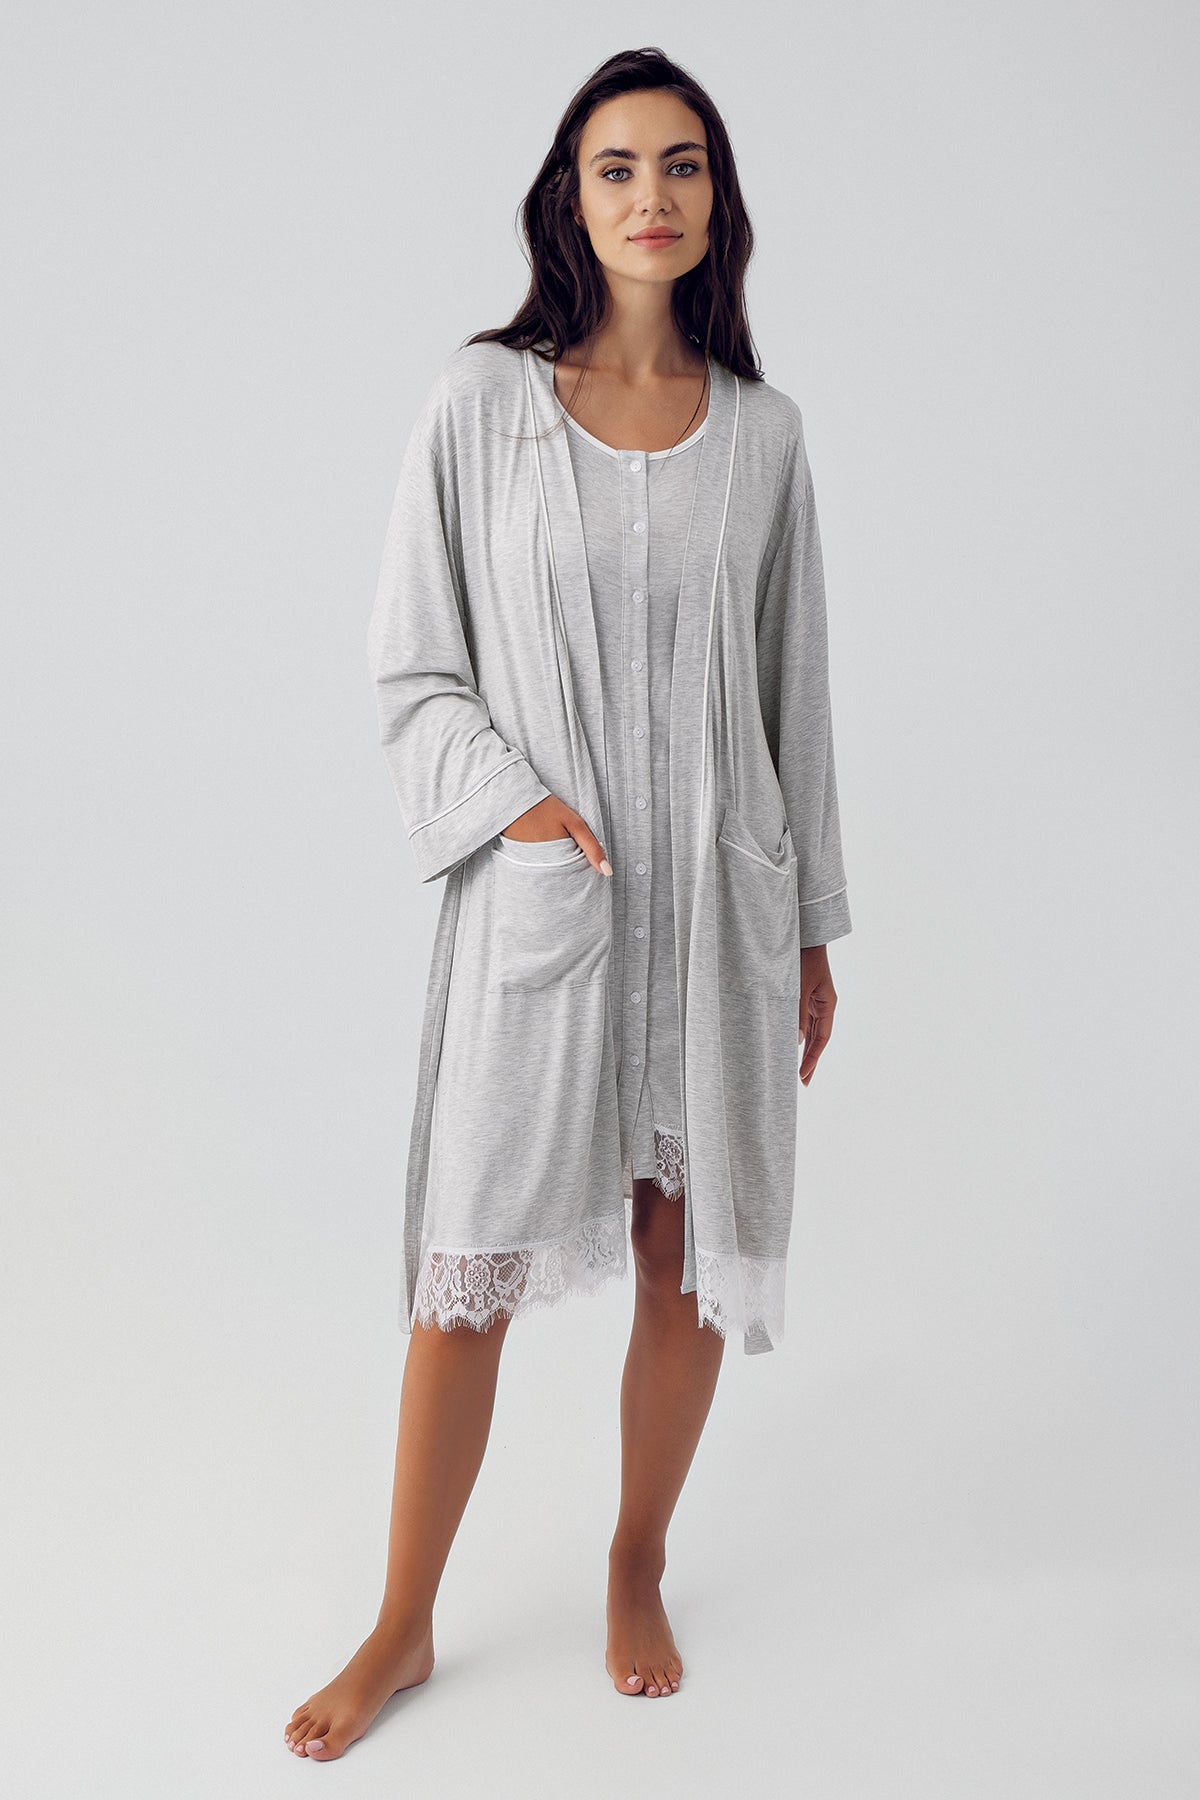 Shopymommy 15403 Melange Lace Maternity & Nursing Nightgown With Robe Grey